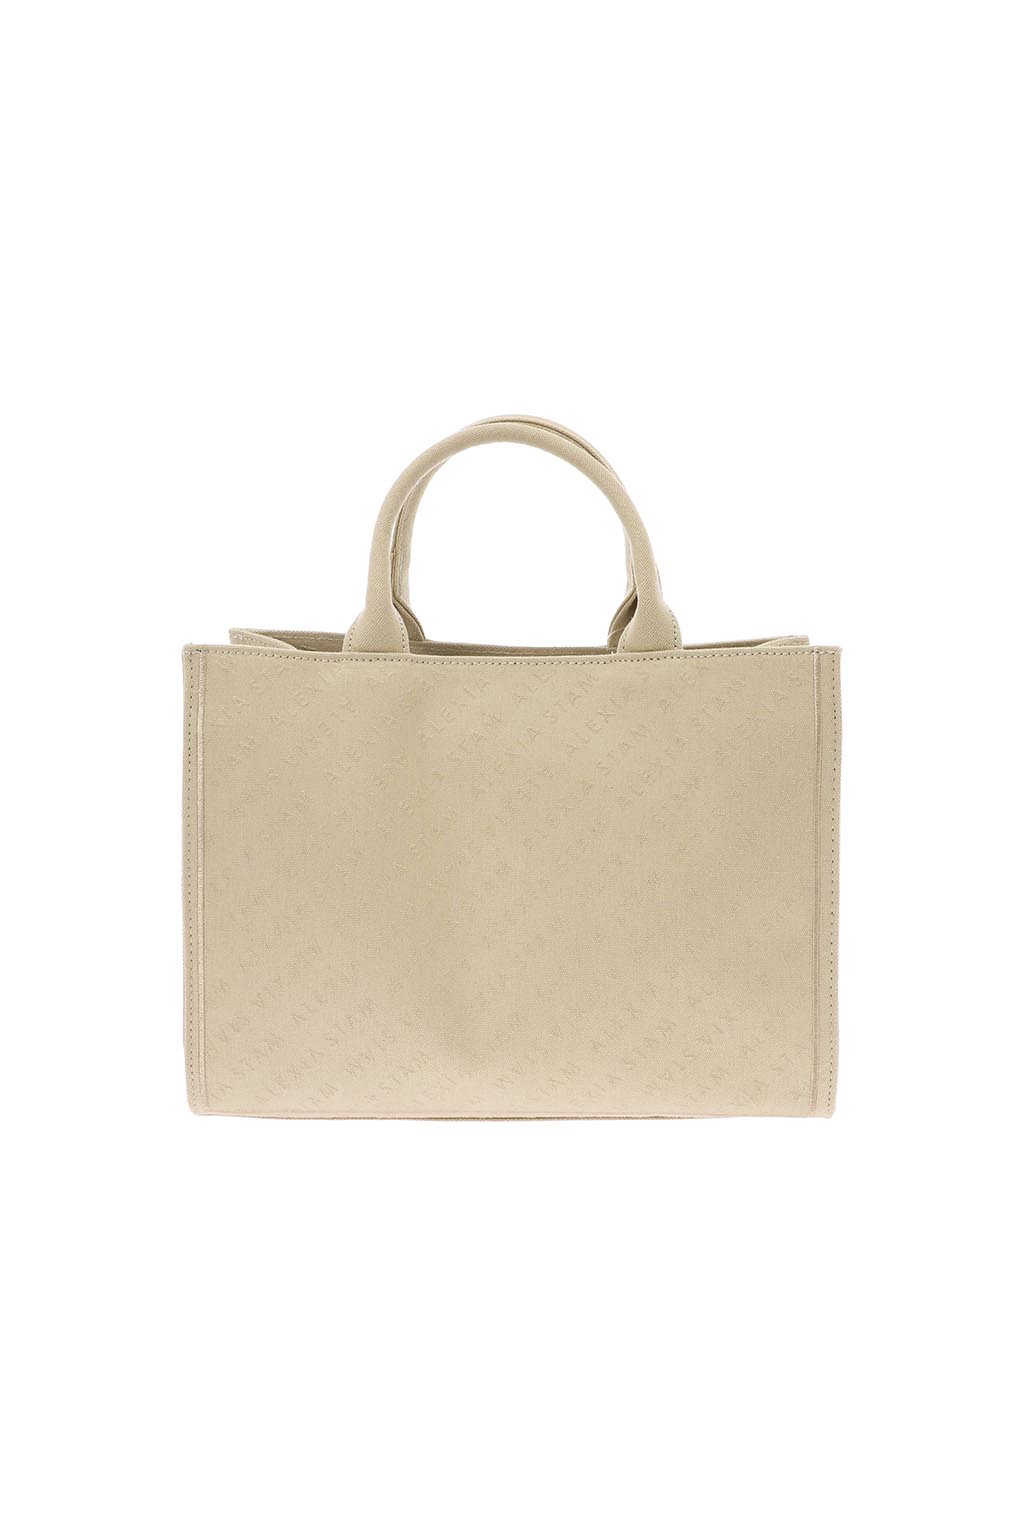 embossed-logo-square-small-tote-bag-beige-09